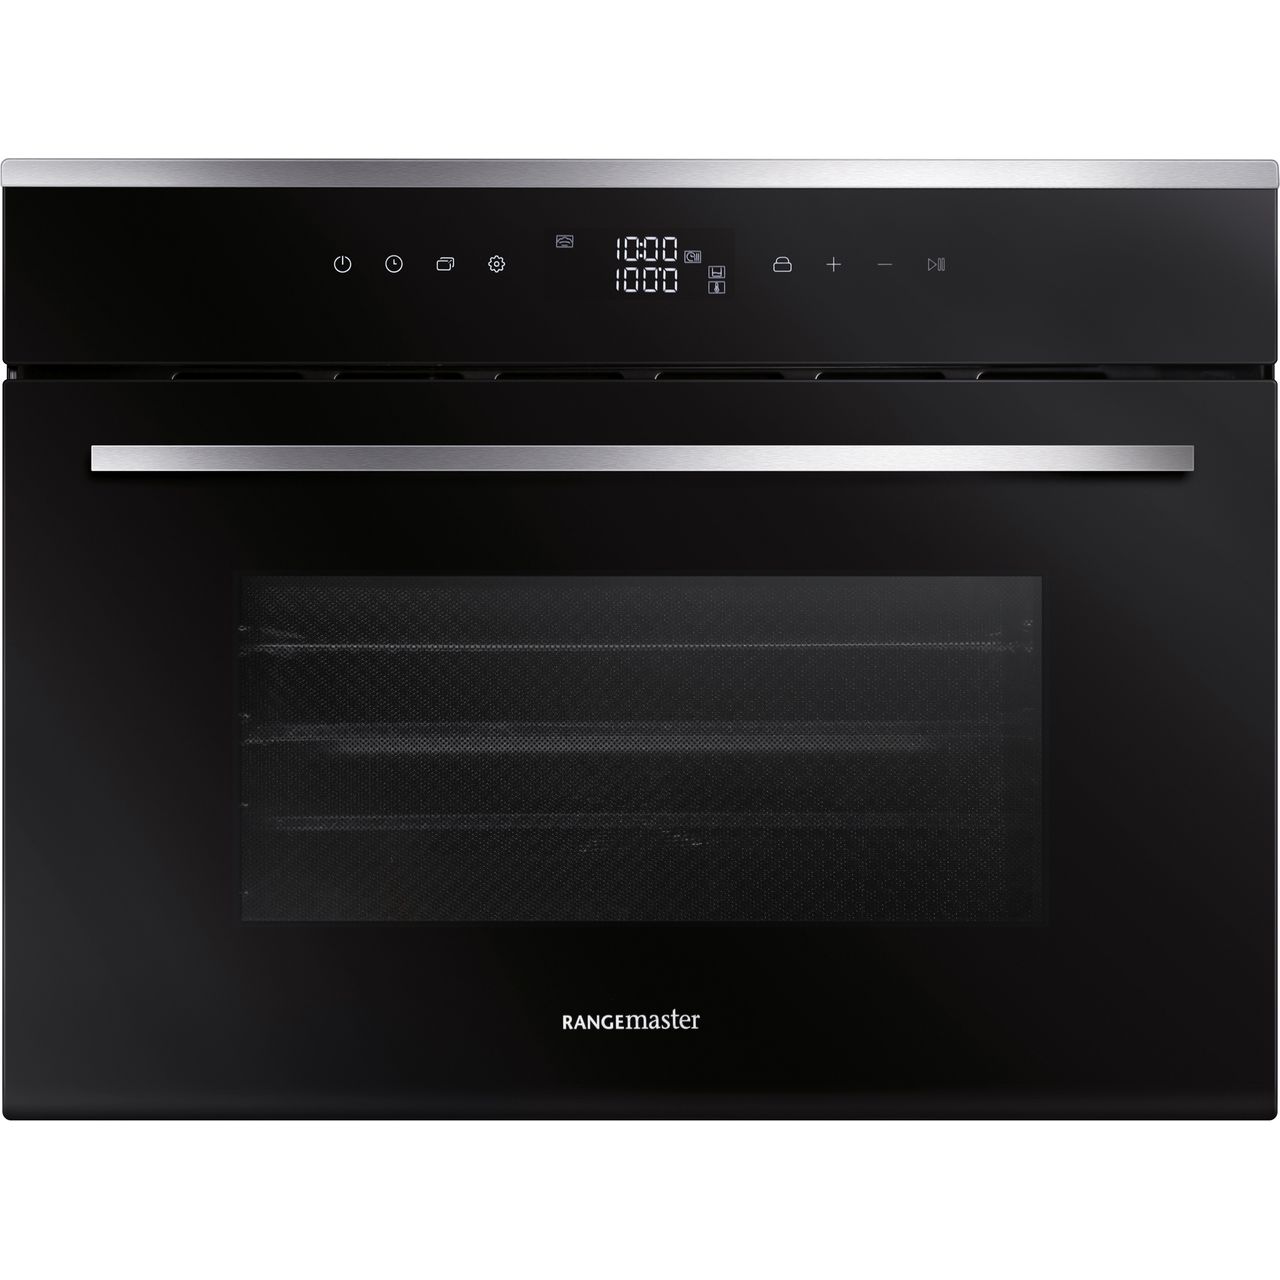 Rangemaster RMB45SCBL/SS Built In Compact Steam Oven Review